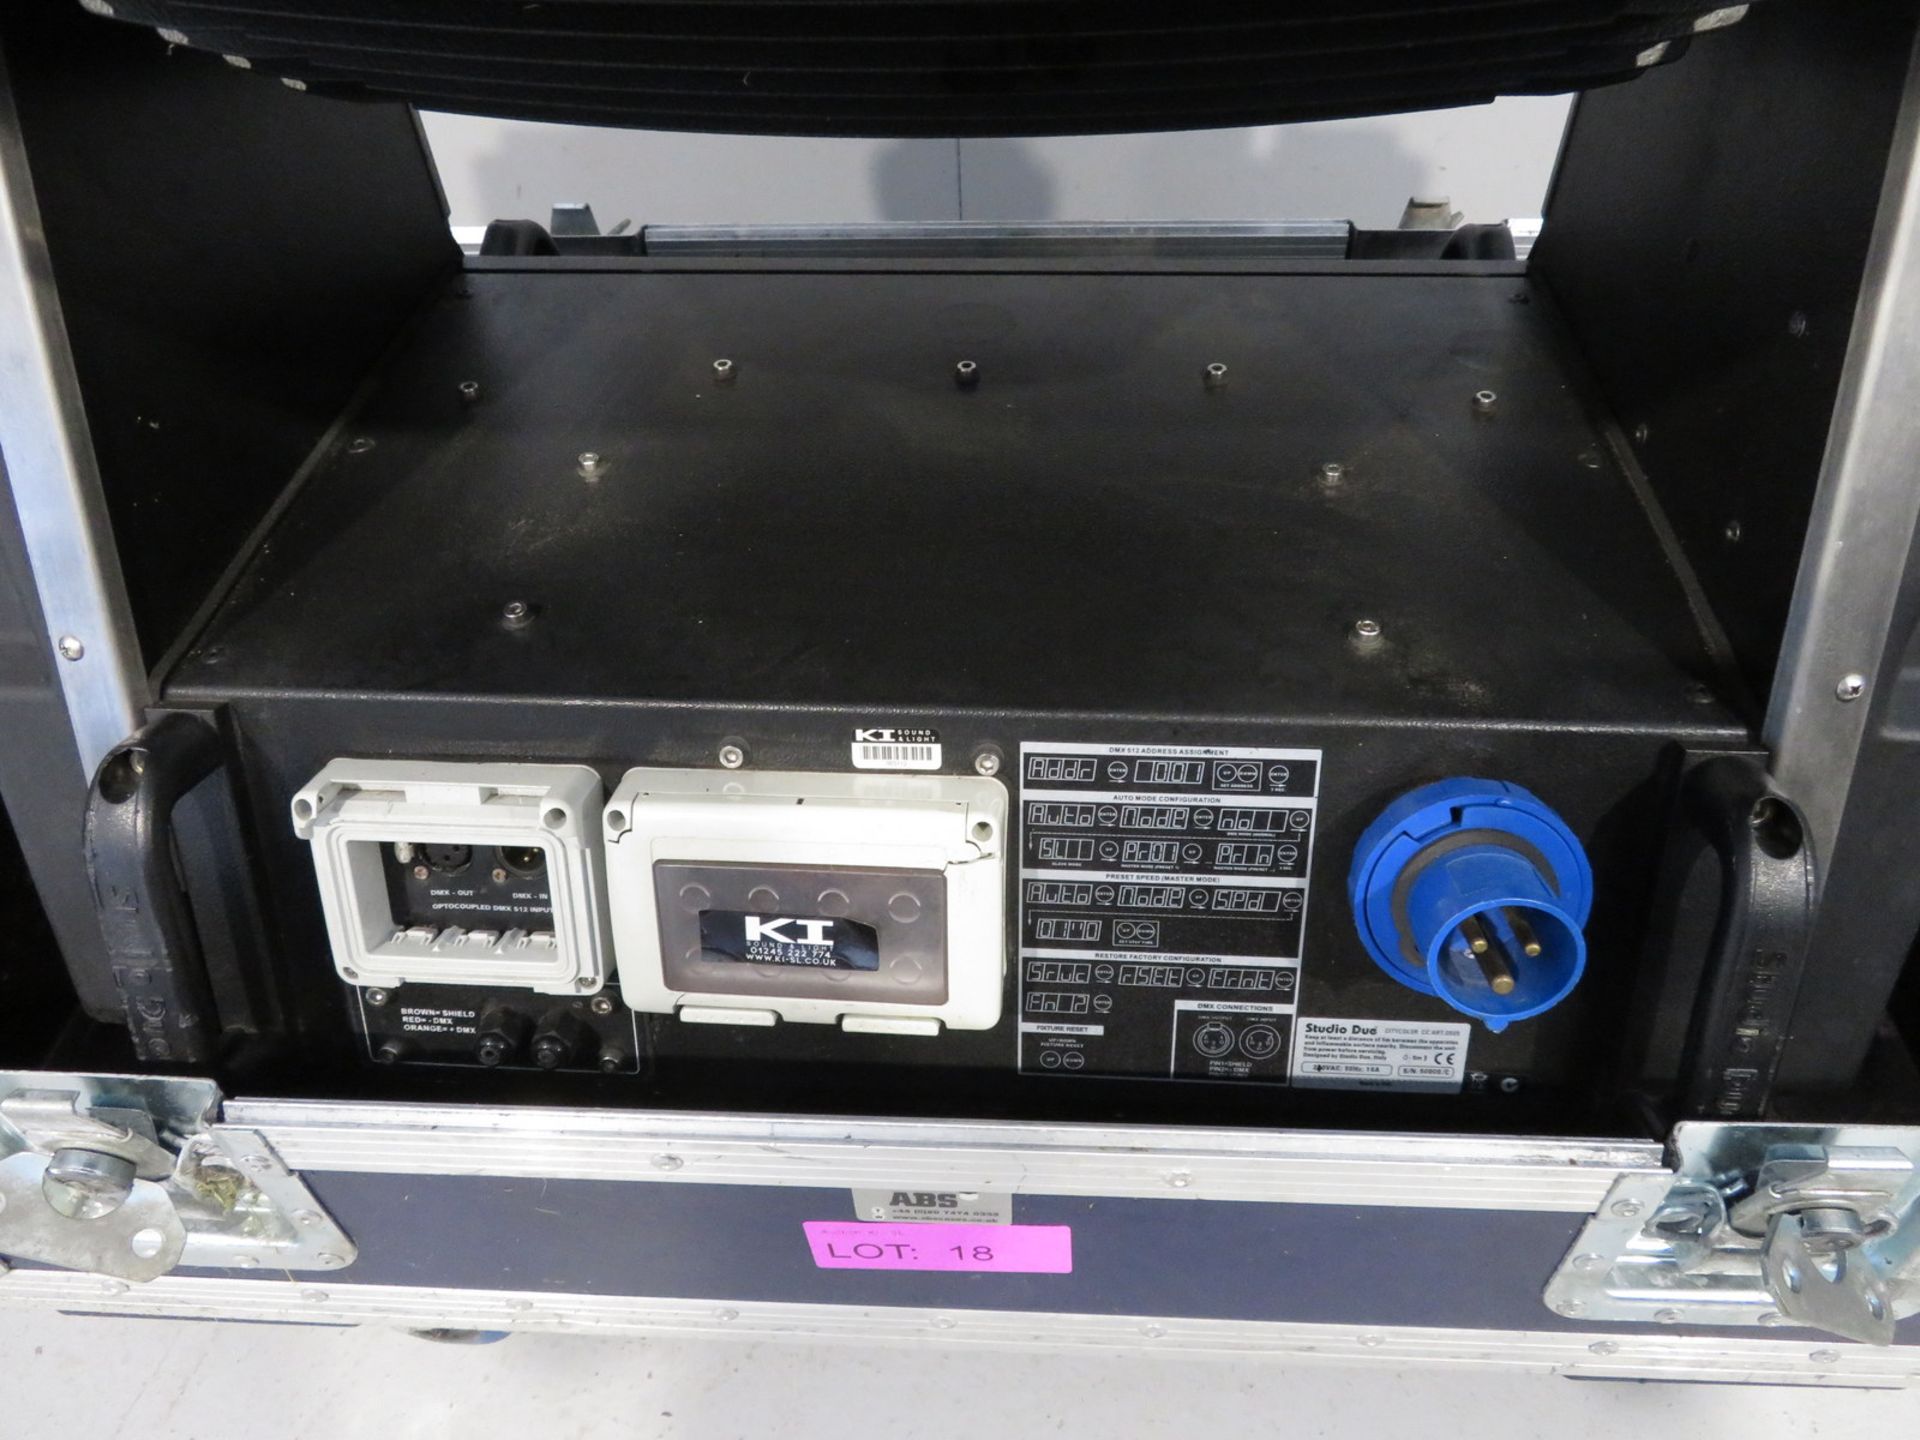 Studio Due City Colour 2500 Wash in flightcase. Working condition. Hours: 1332. - Image 4 of 9